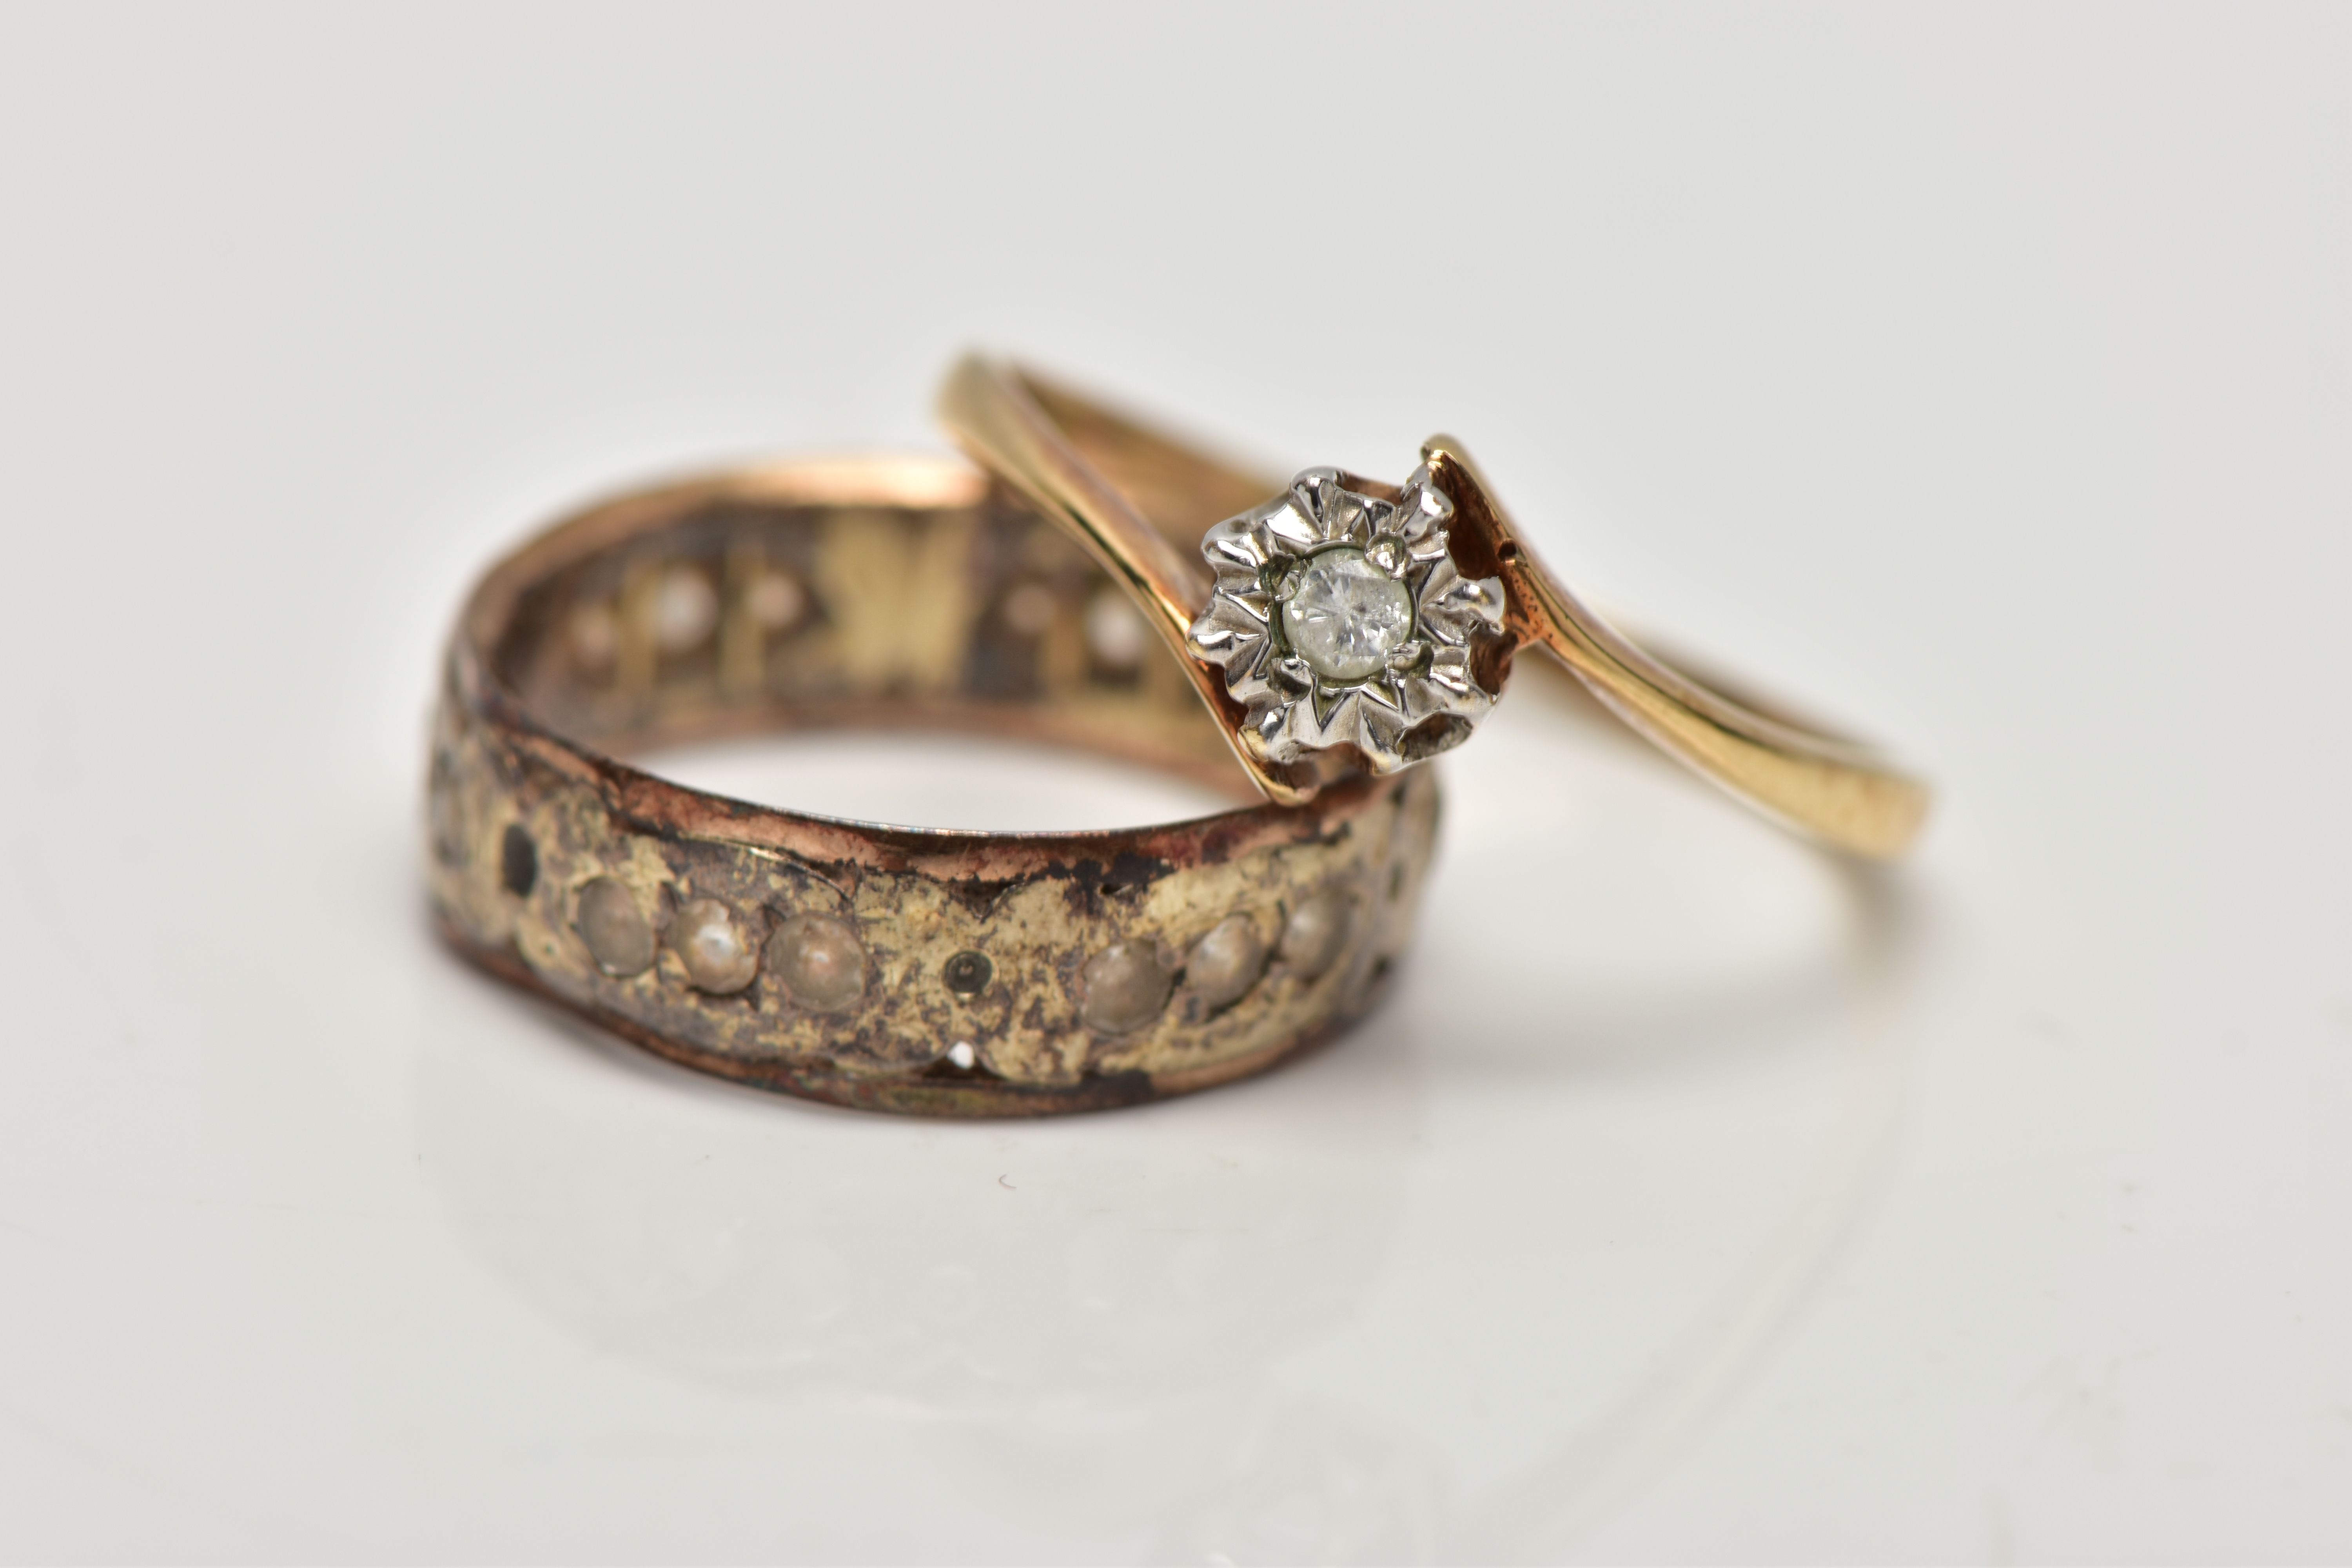 A 9CT GOLD SINGLE STONE DIAMOND RING AND A BAND RING, the first designed with an illusion set